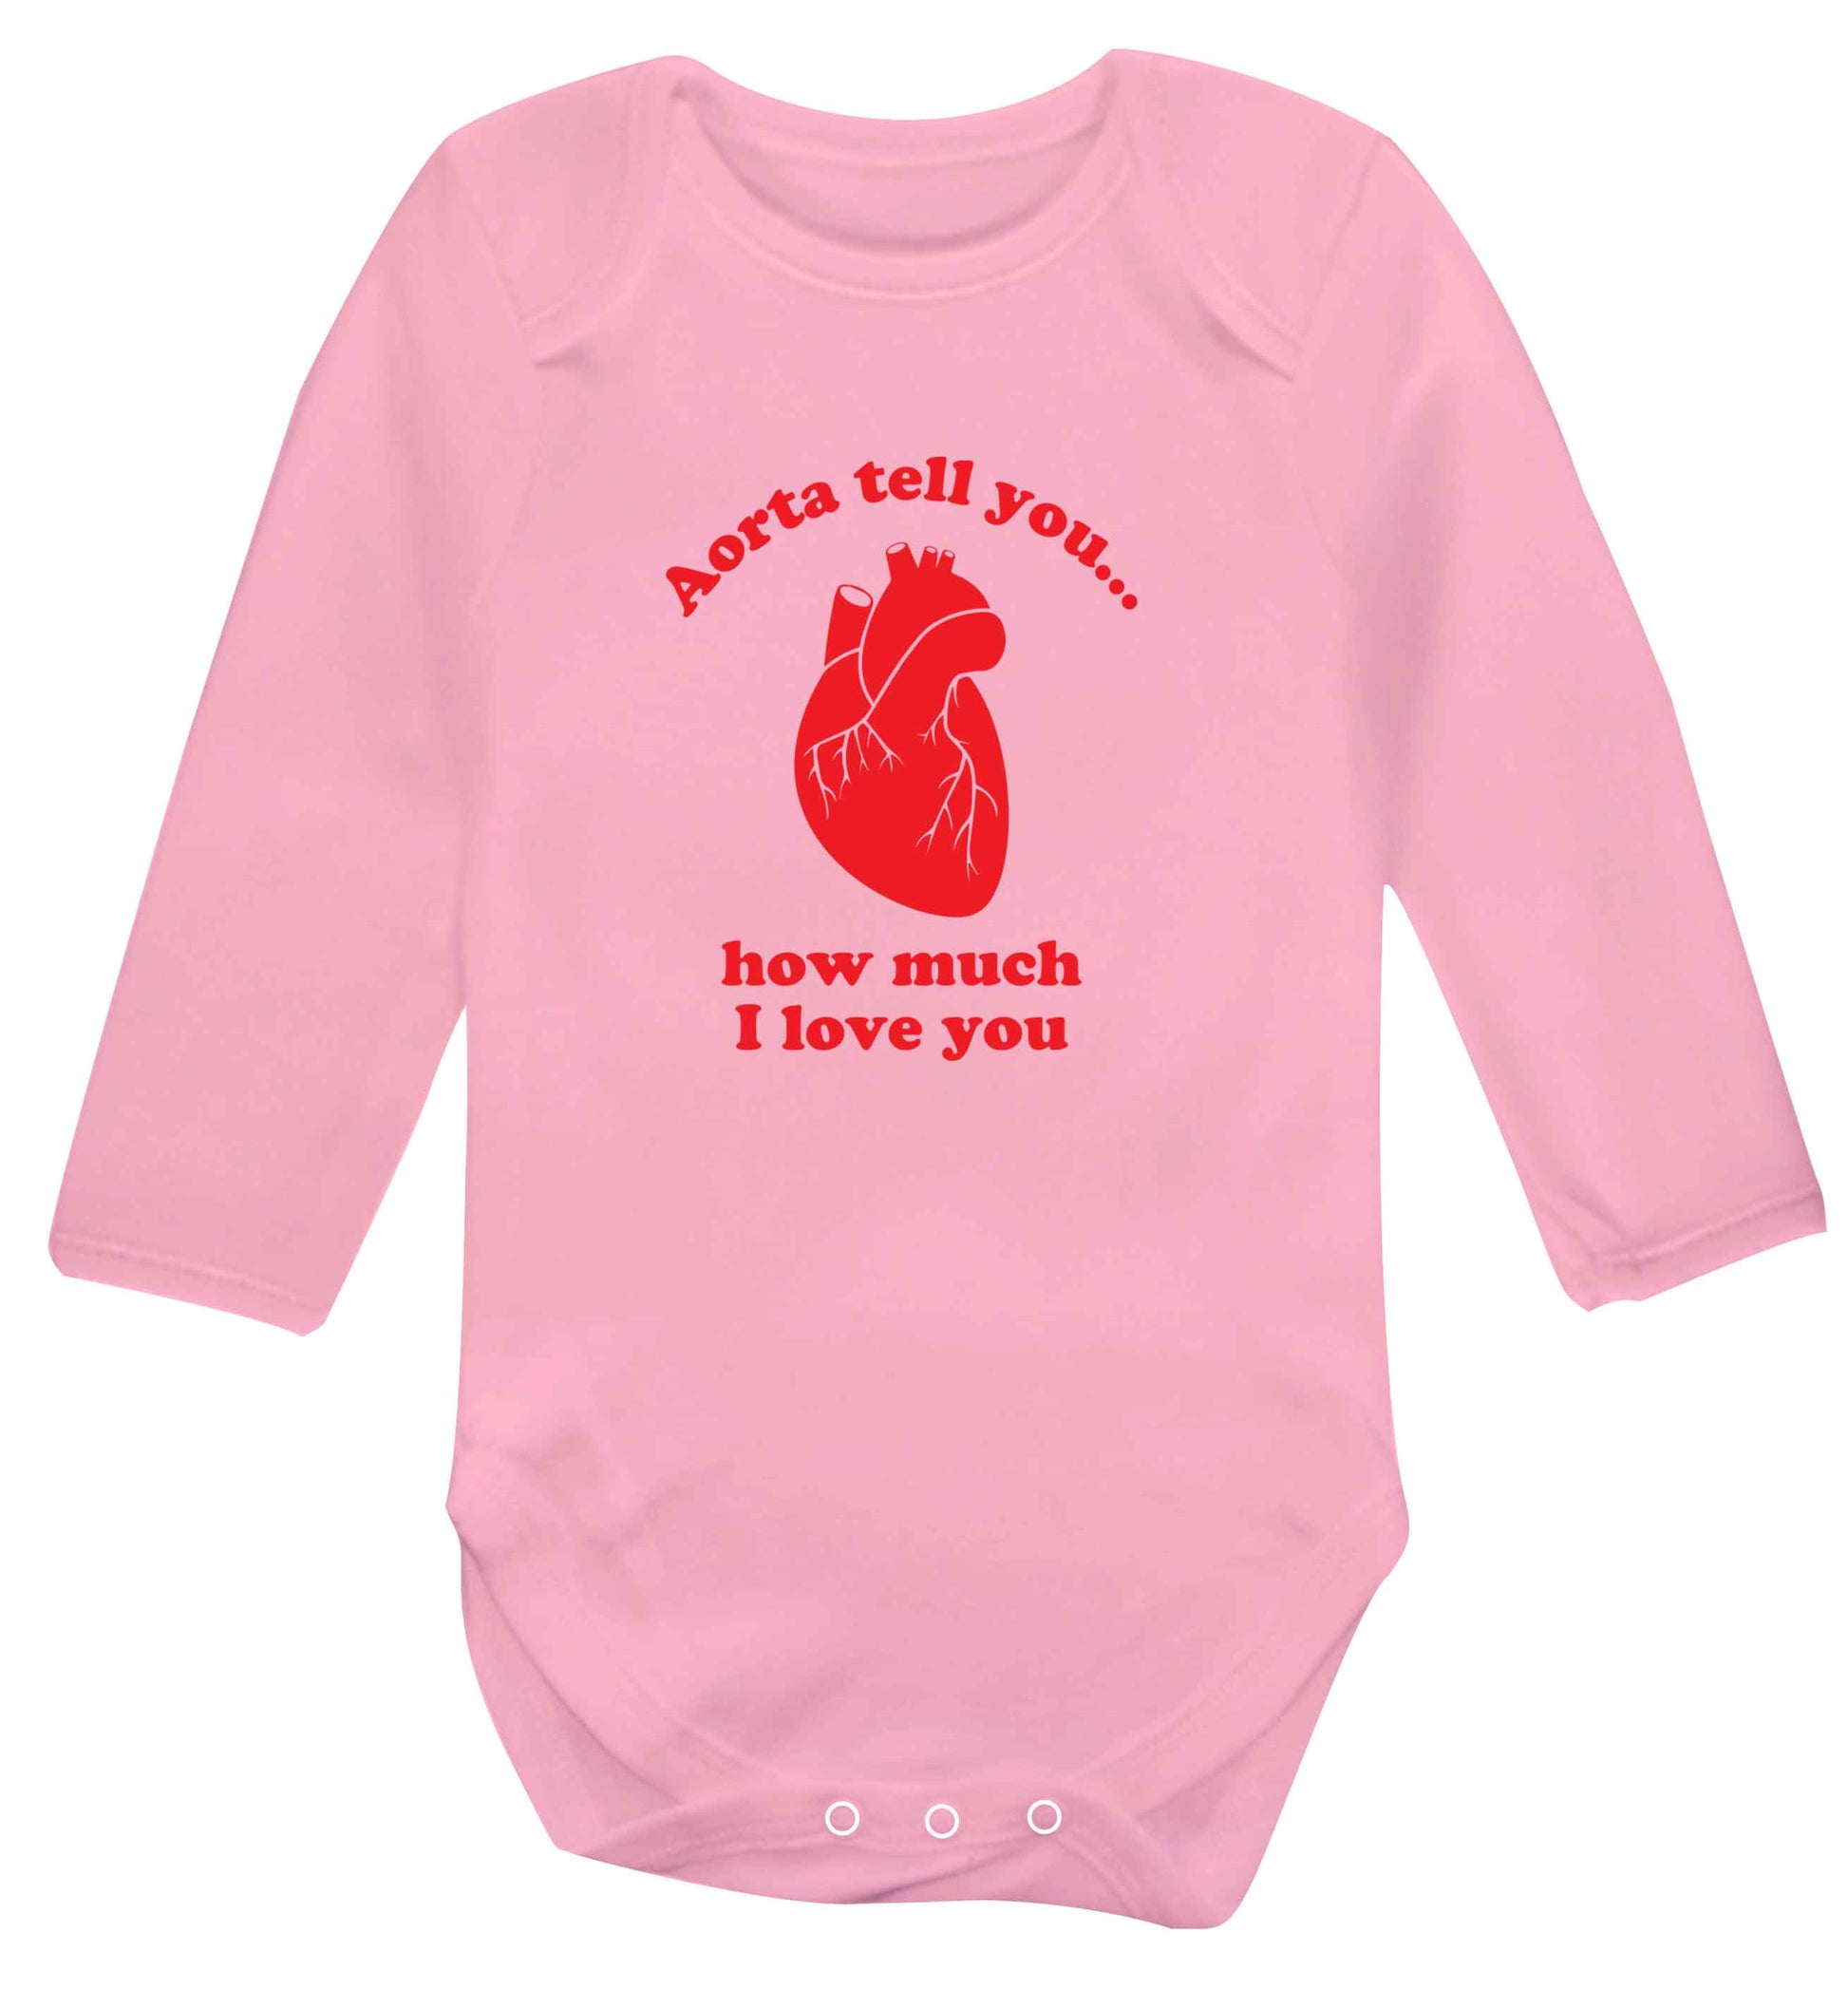 Aorta tell you how much I love you baby vest long sleeved pale pink 6-12 months